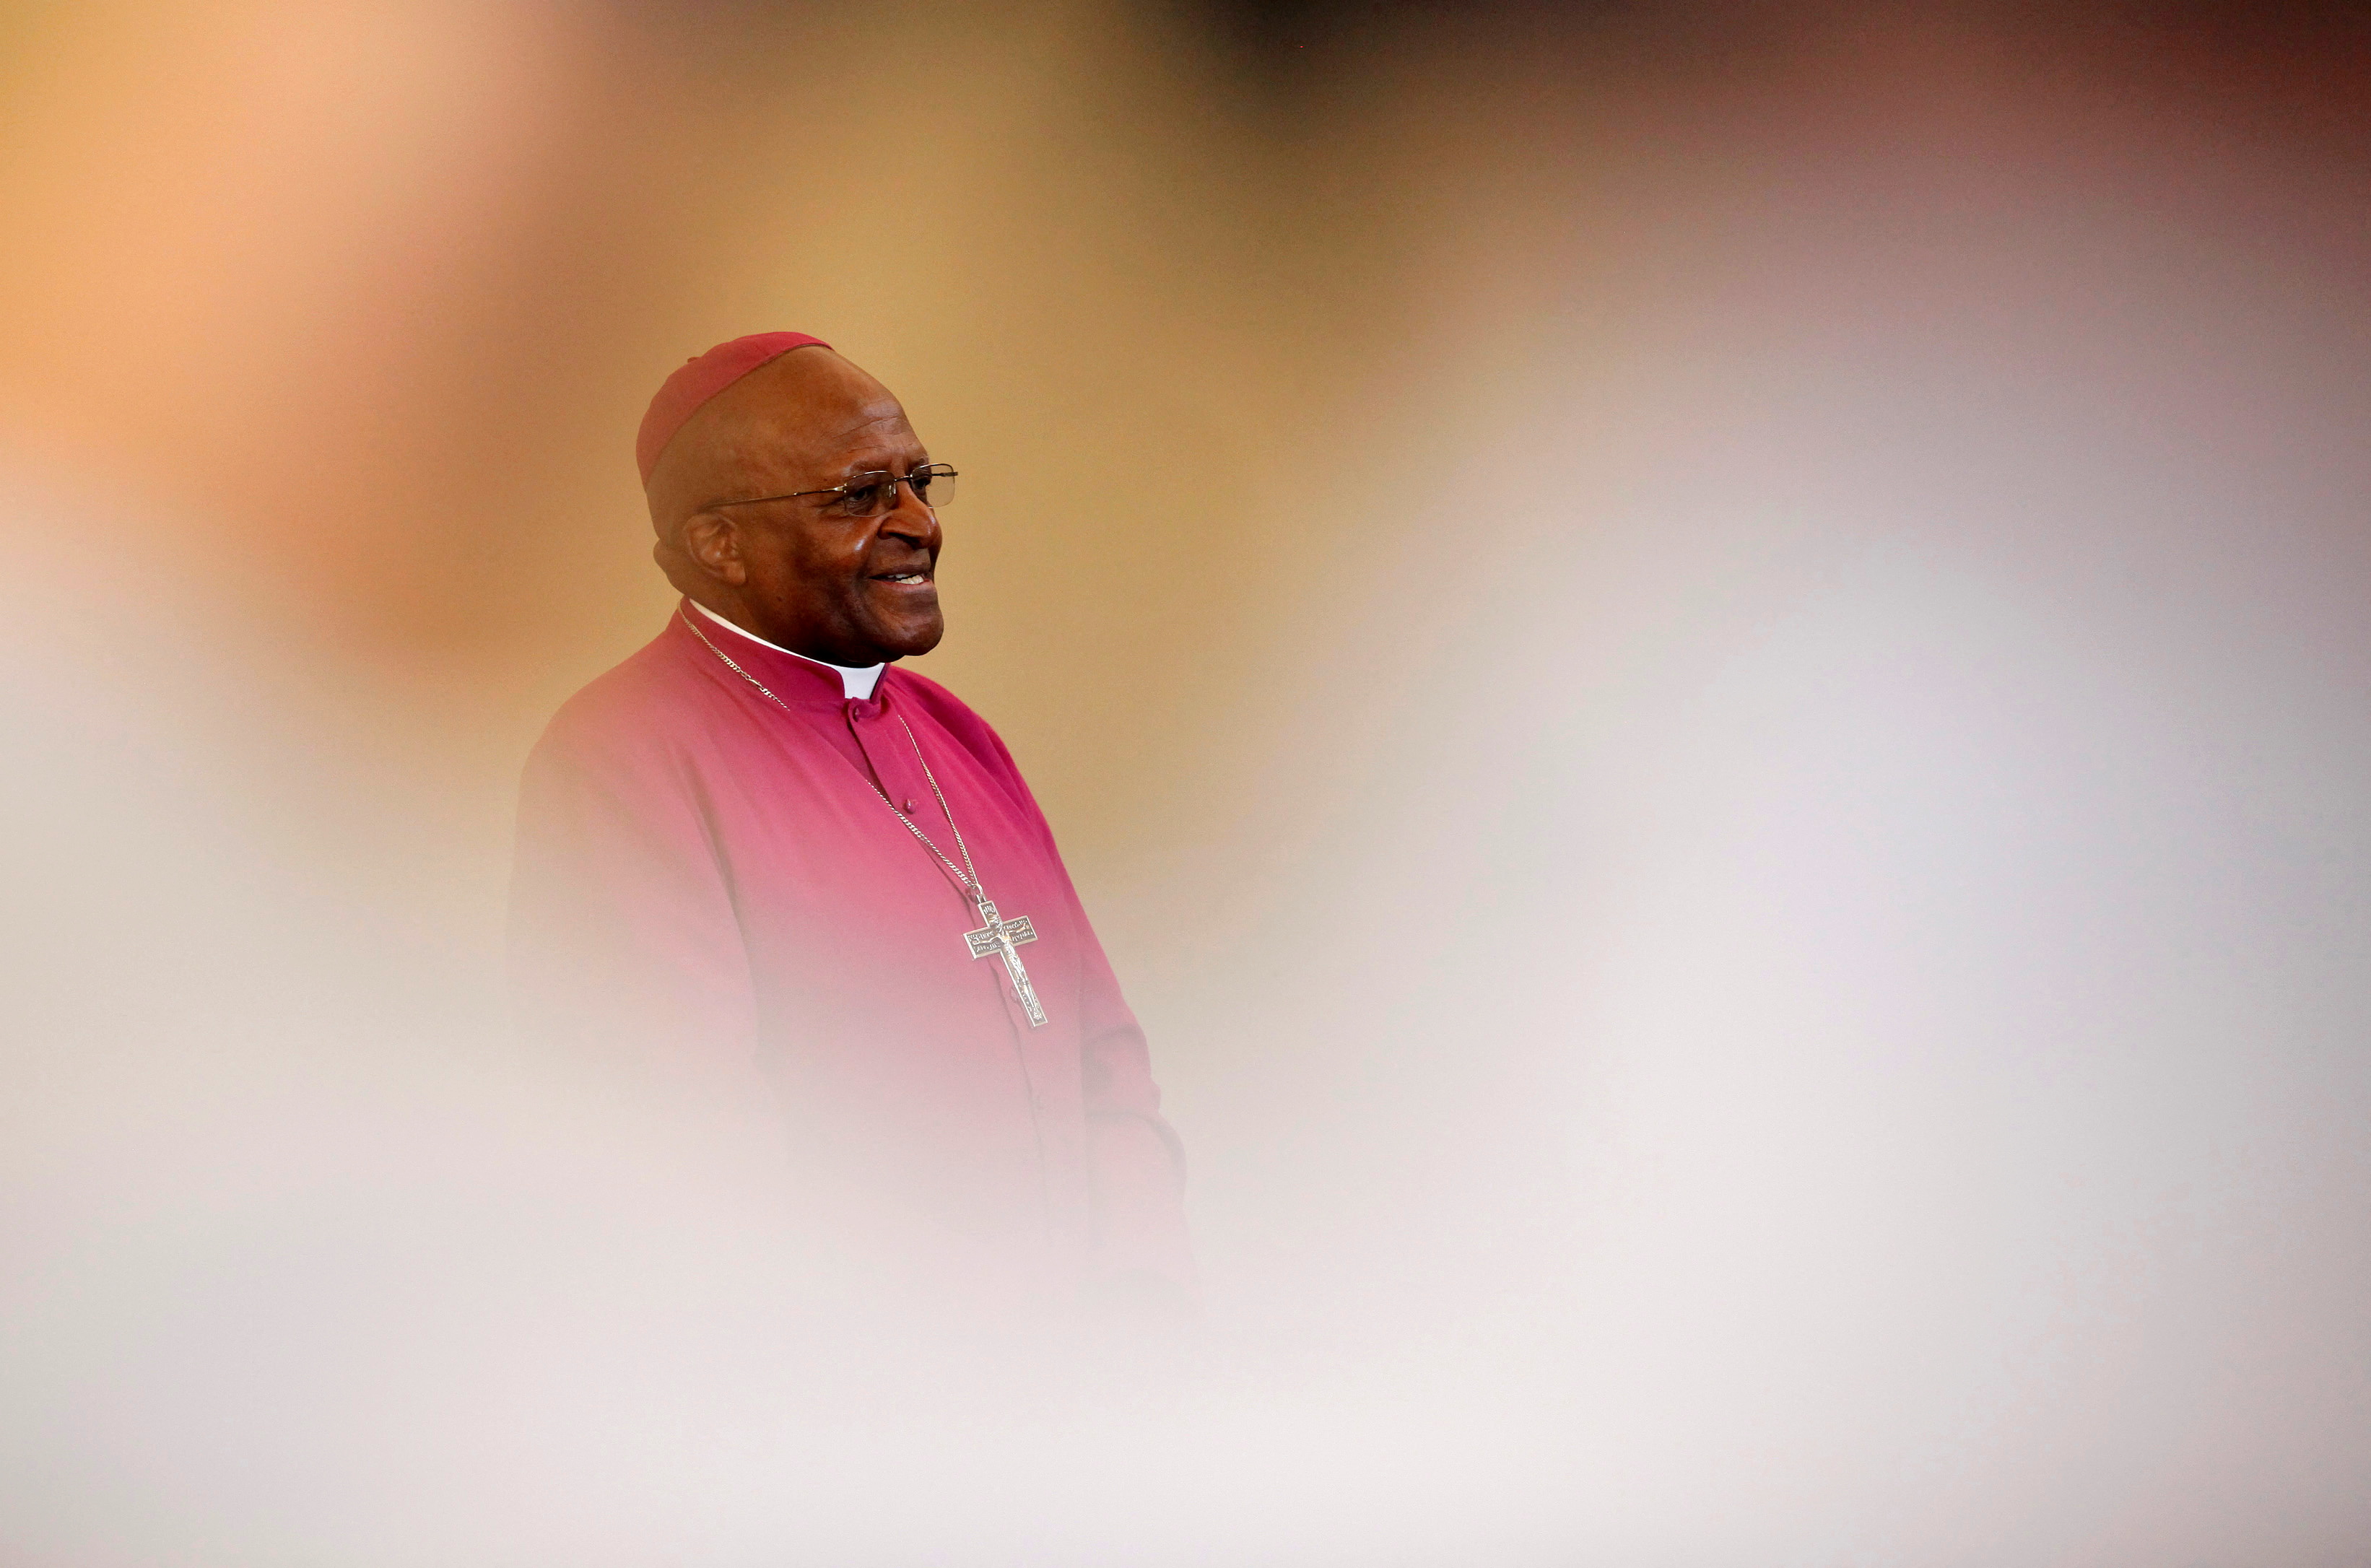 Archbishop Desmond Tutu is seen through crowds during a visit to a youth centre in Masiphelele township near Cape Town